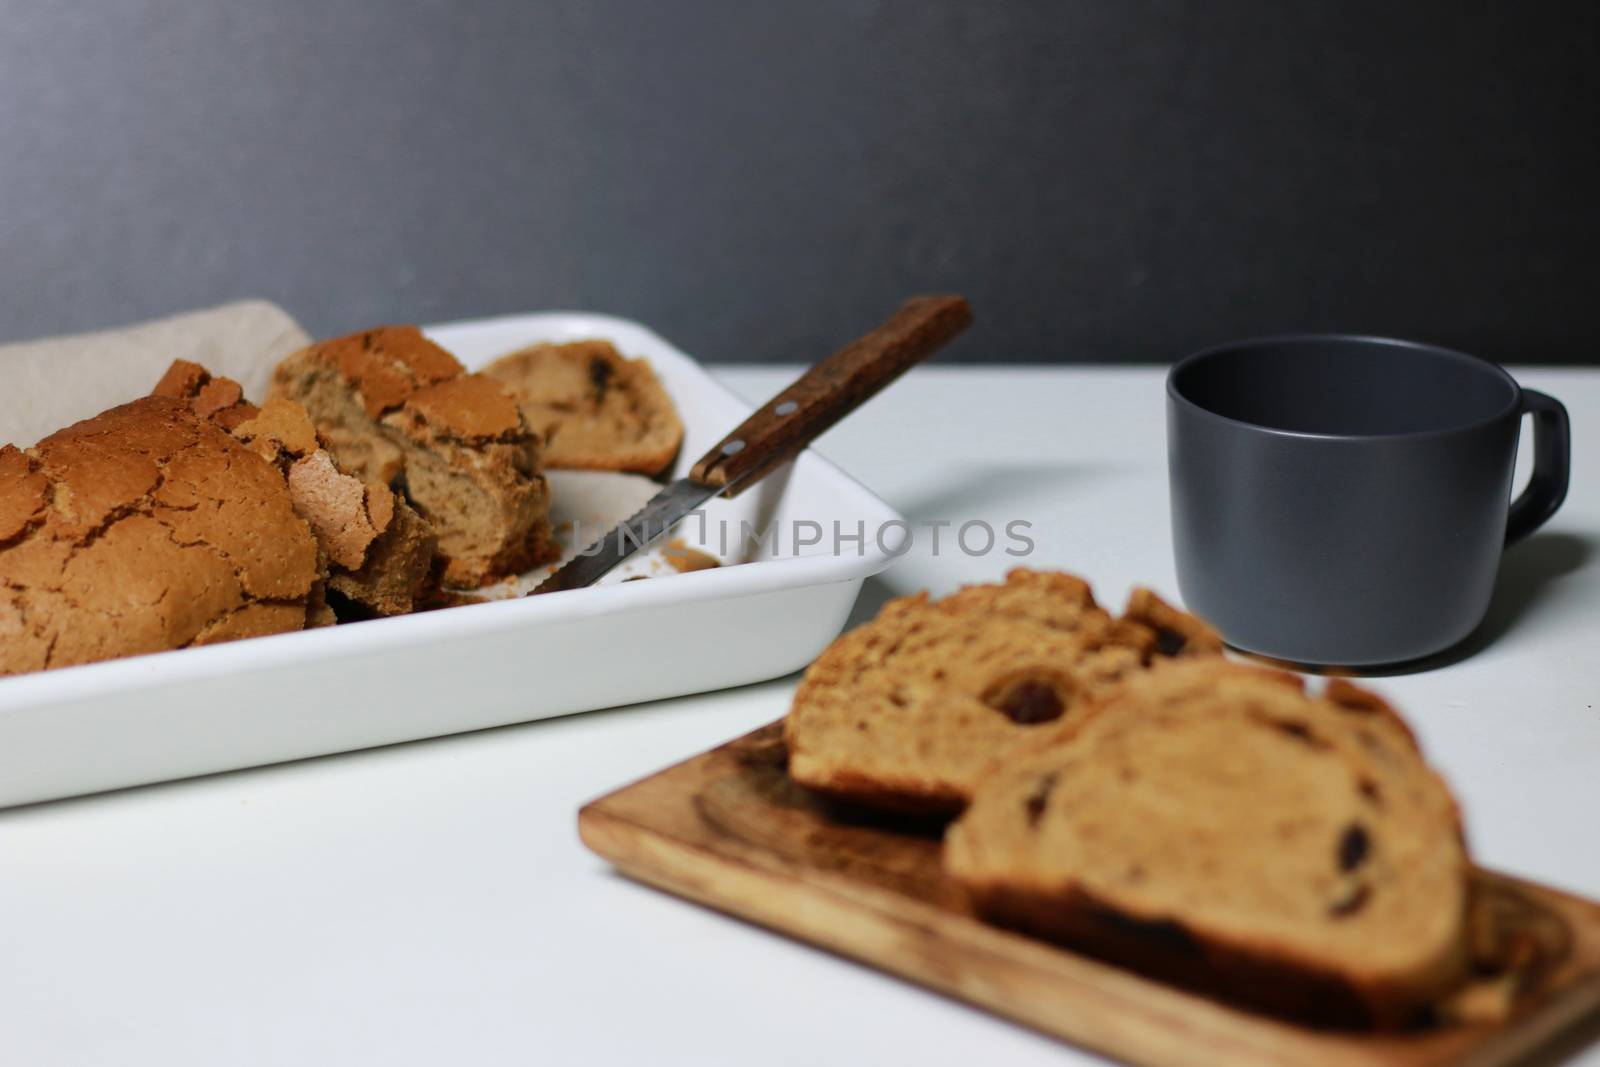 Two slices of bread and mug on table